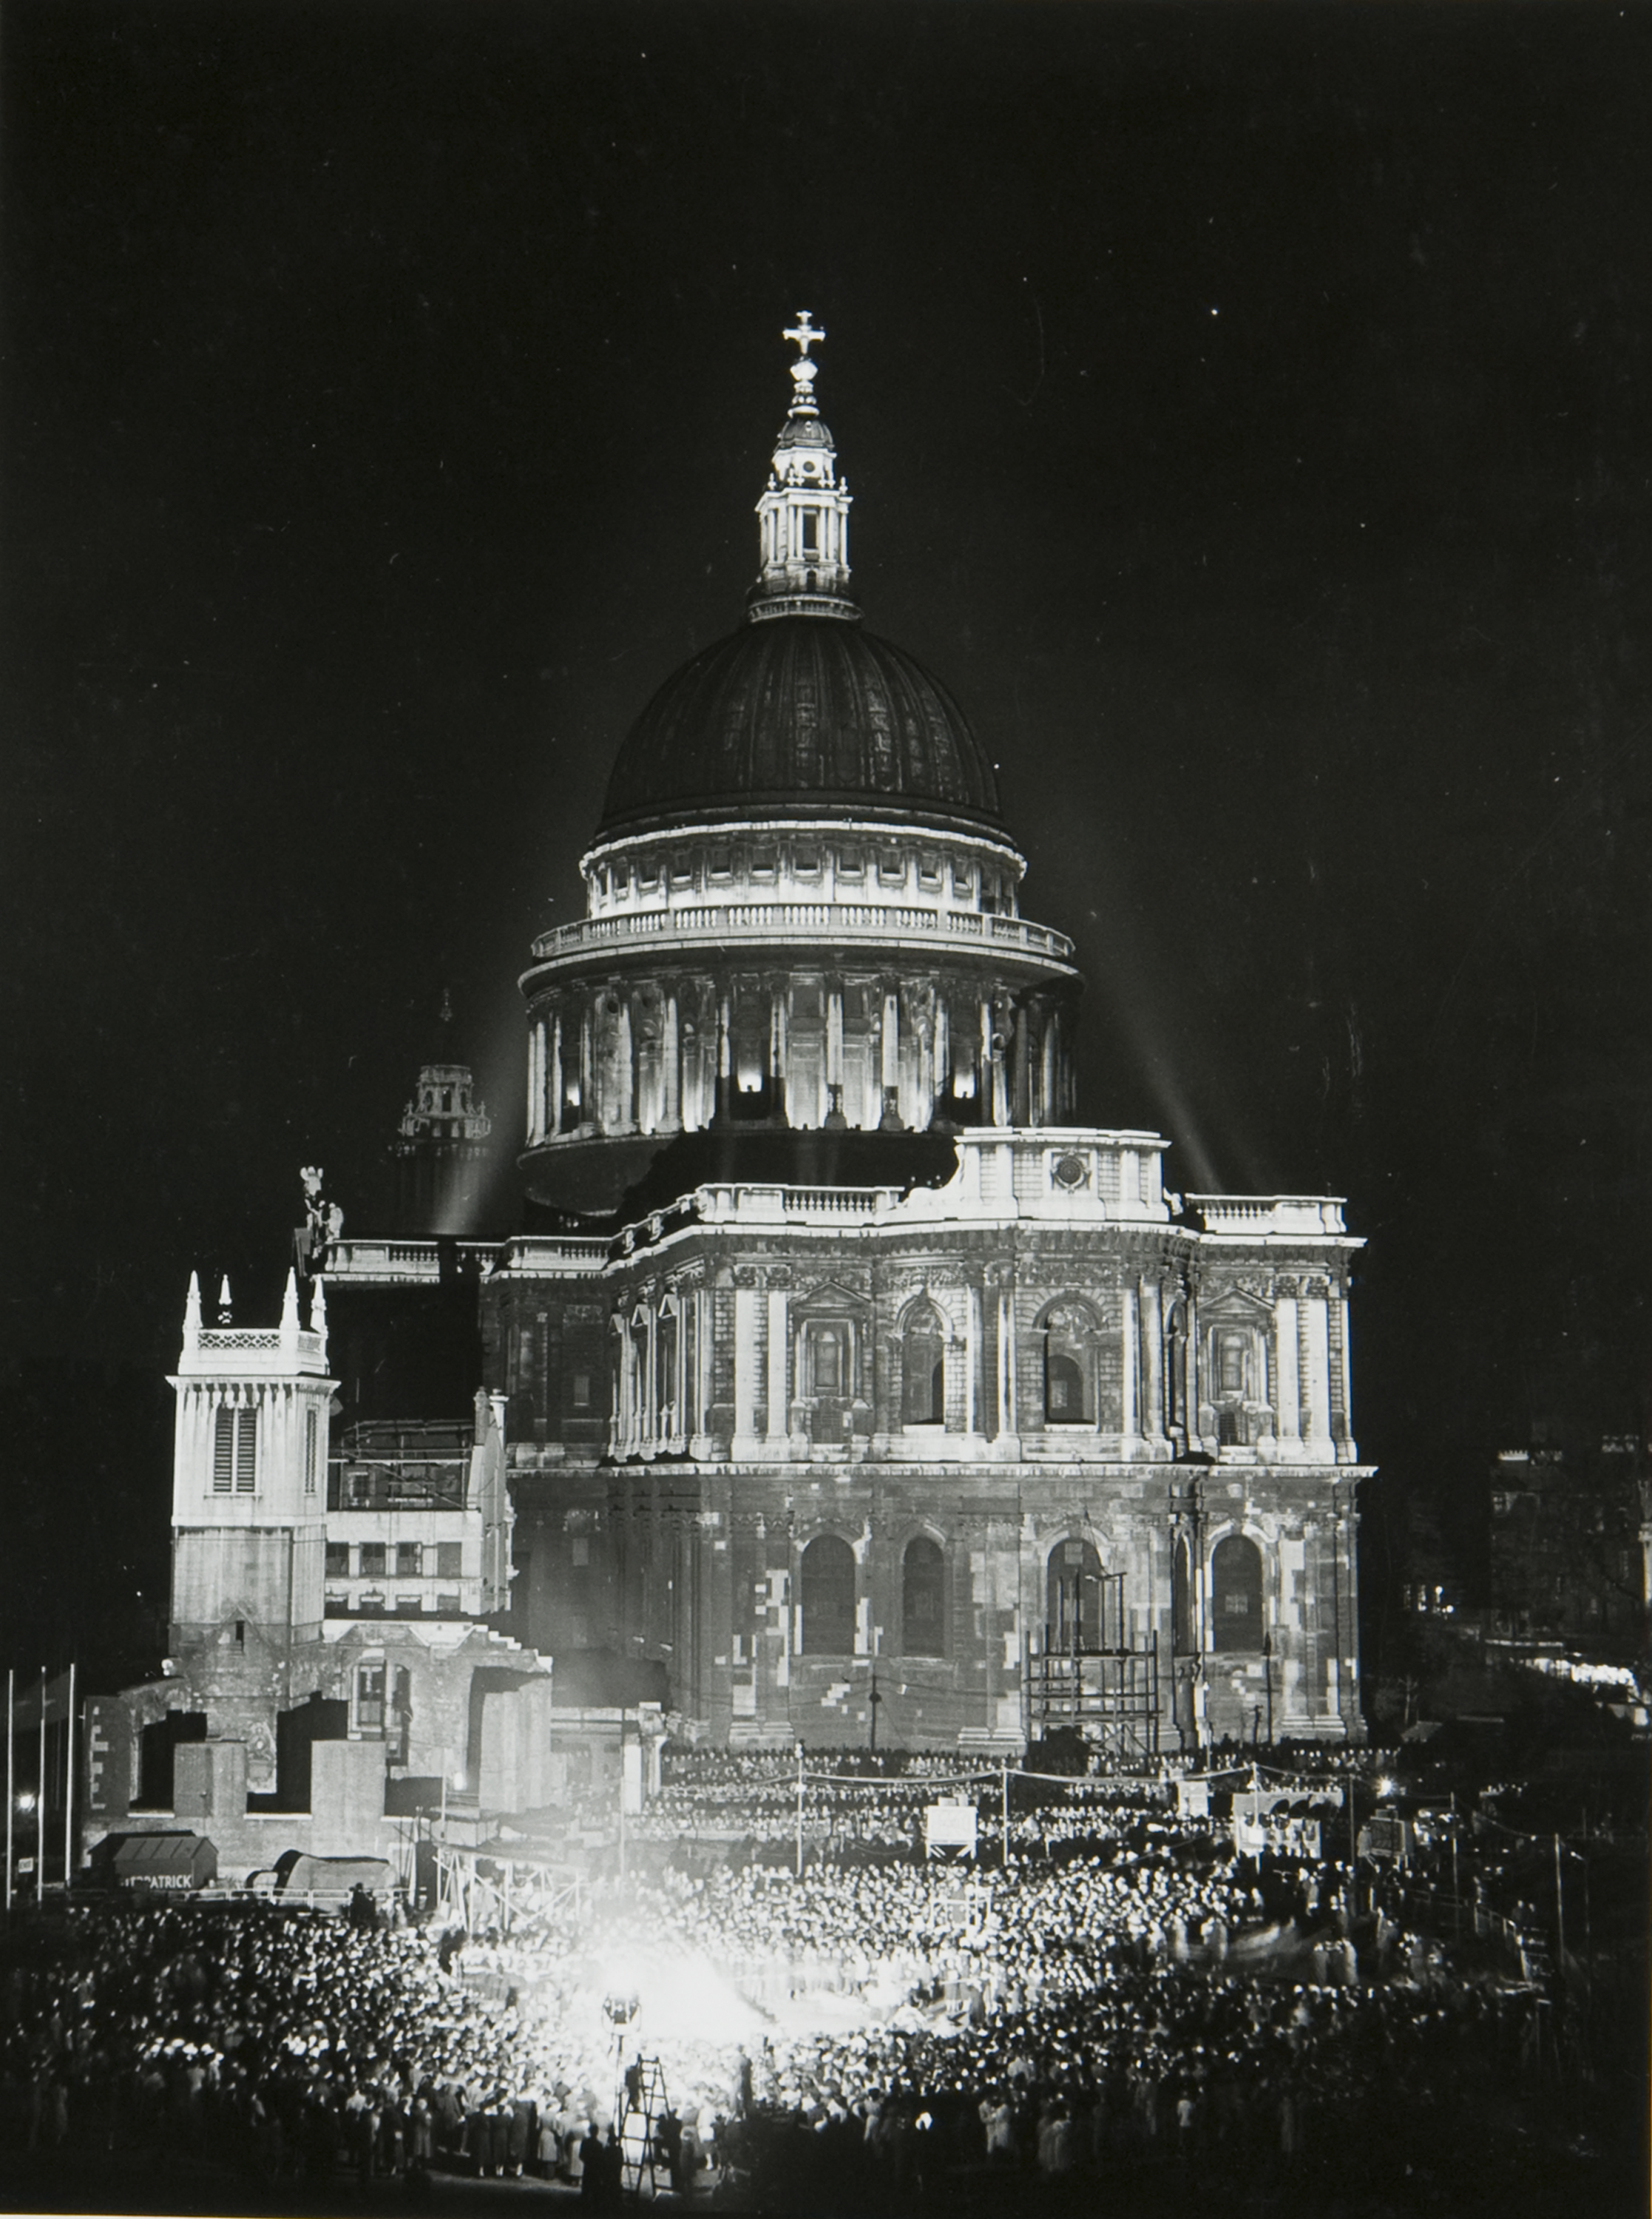 St. Paul's survival the London blitz, in 1940, and came symbolise, like Winston, the unbreakable spirit of the 'finest hour'. 